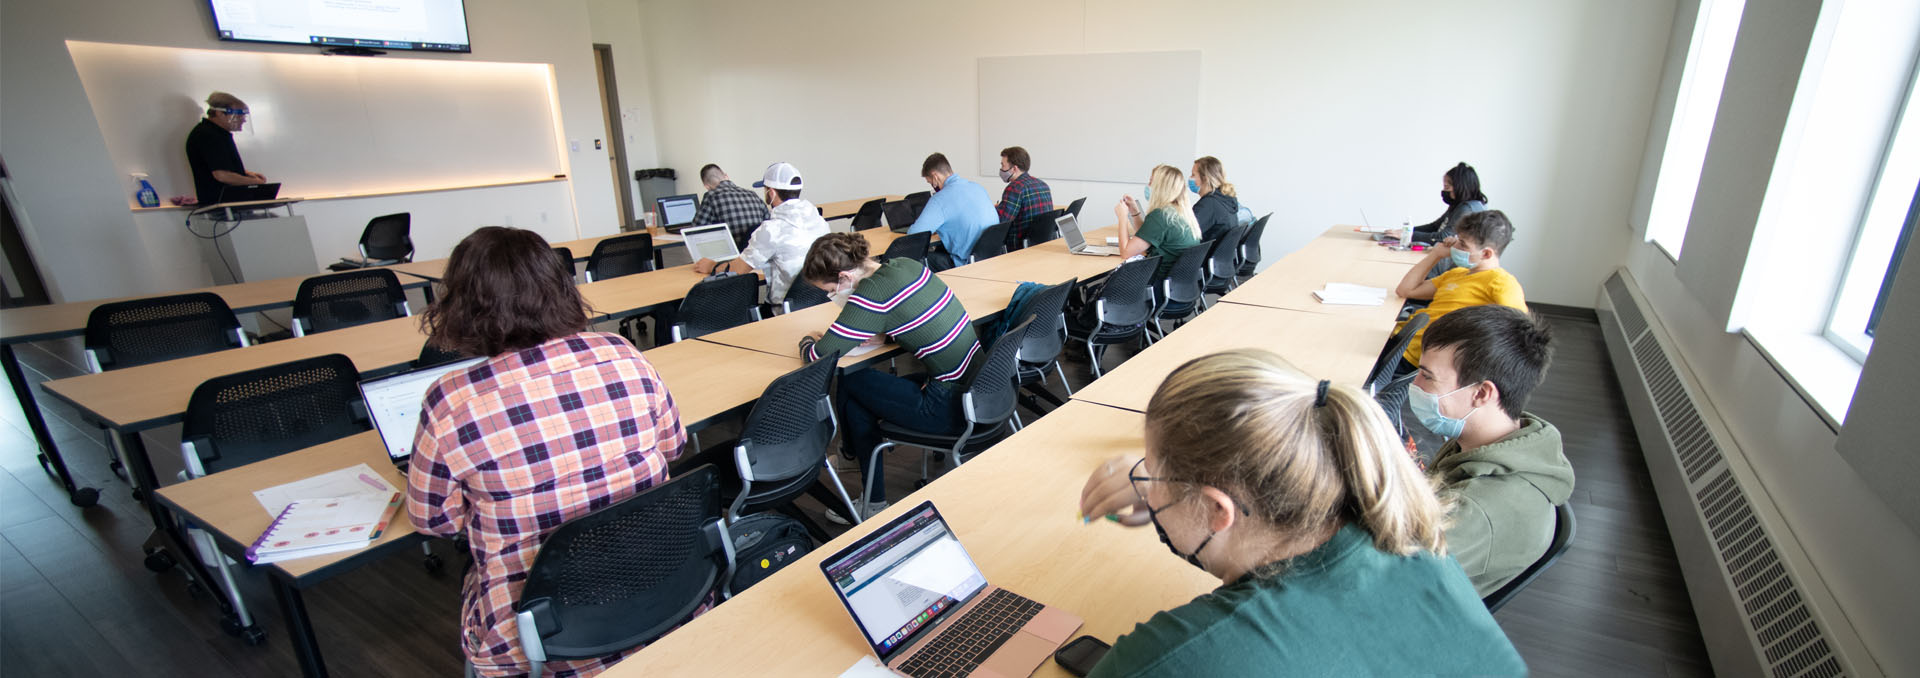 students attend class in the Harold Alfond Hall